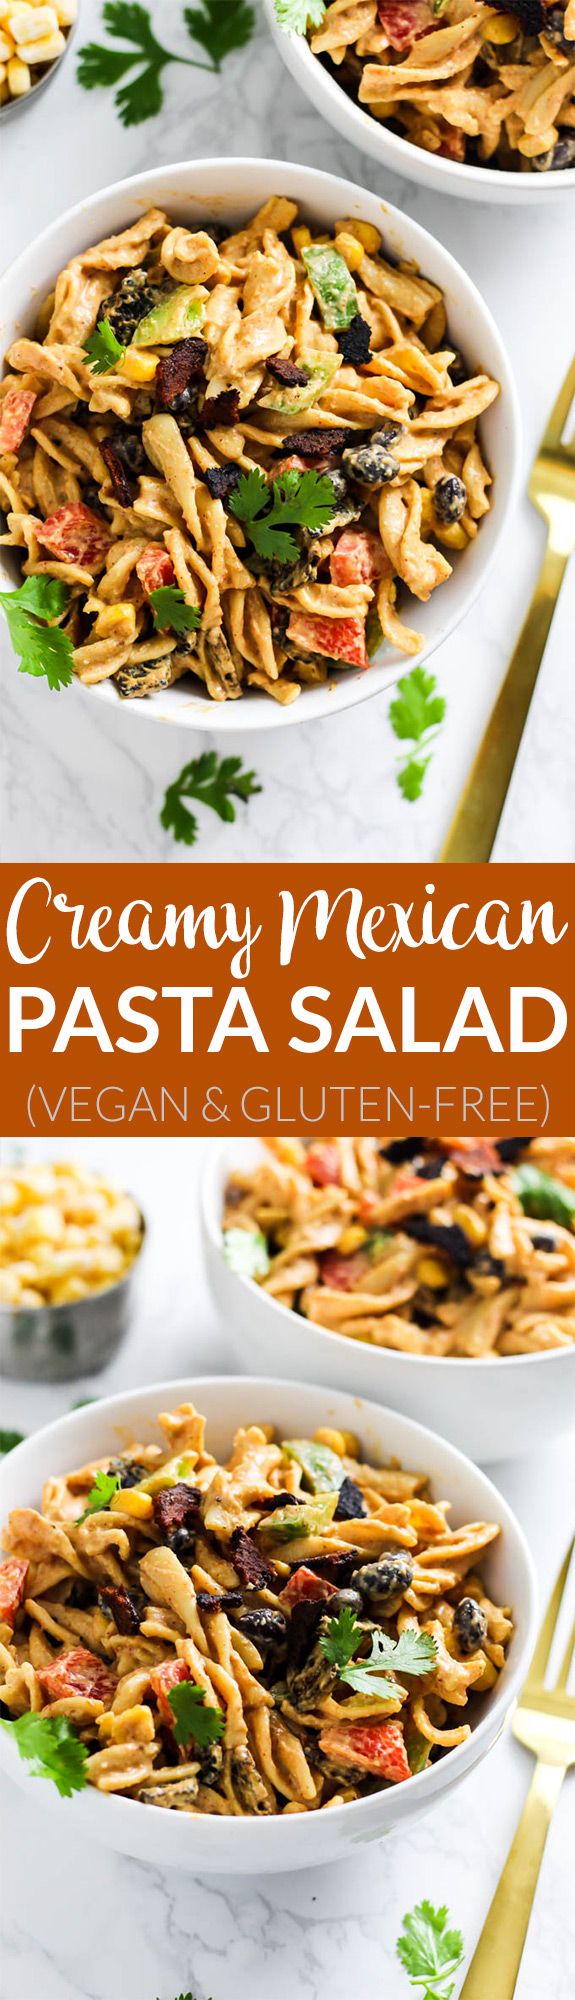 This Creamy Vegan Mexican Pasta Salad is packed with spicy flavor, vegetables and healthy fats to satisfy you at meal time. Only 30 minutes of prep time!